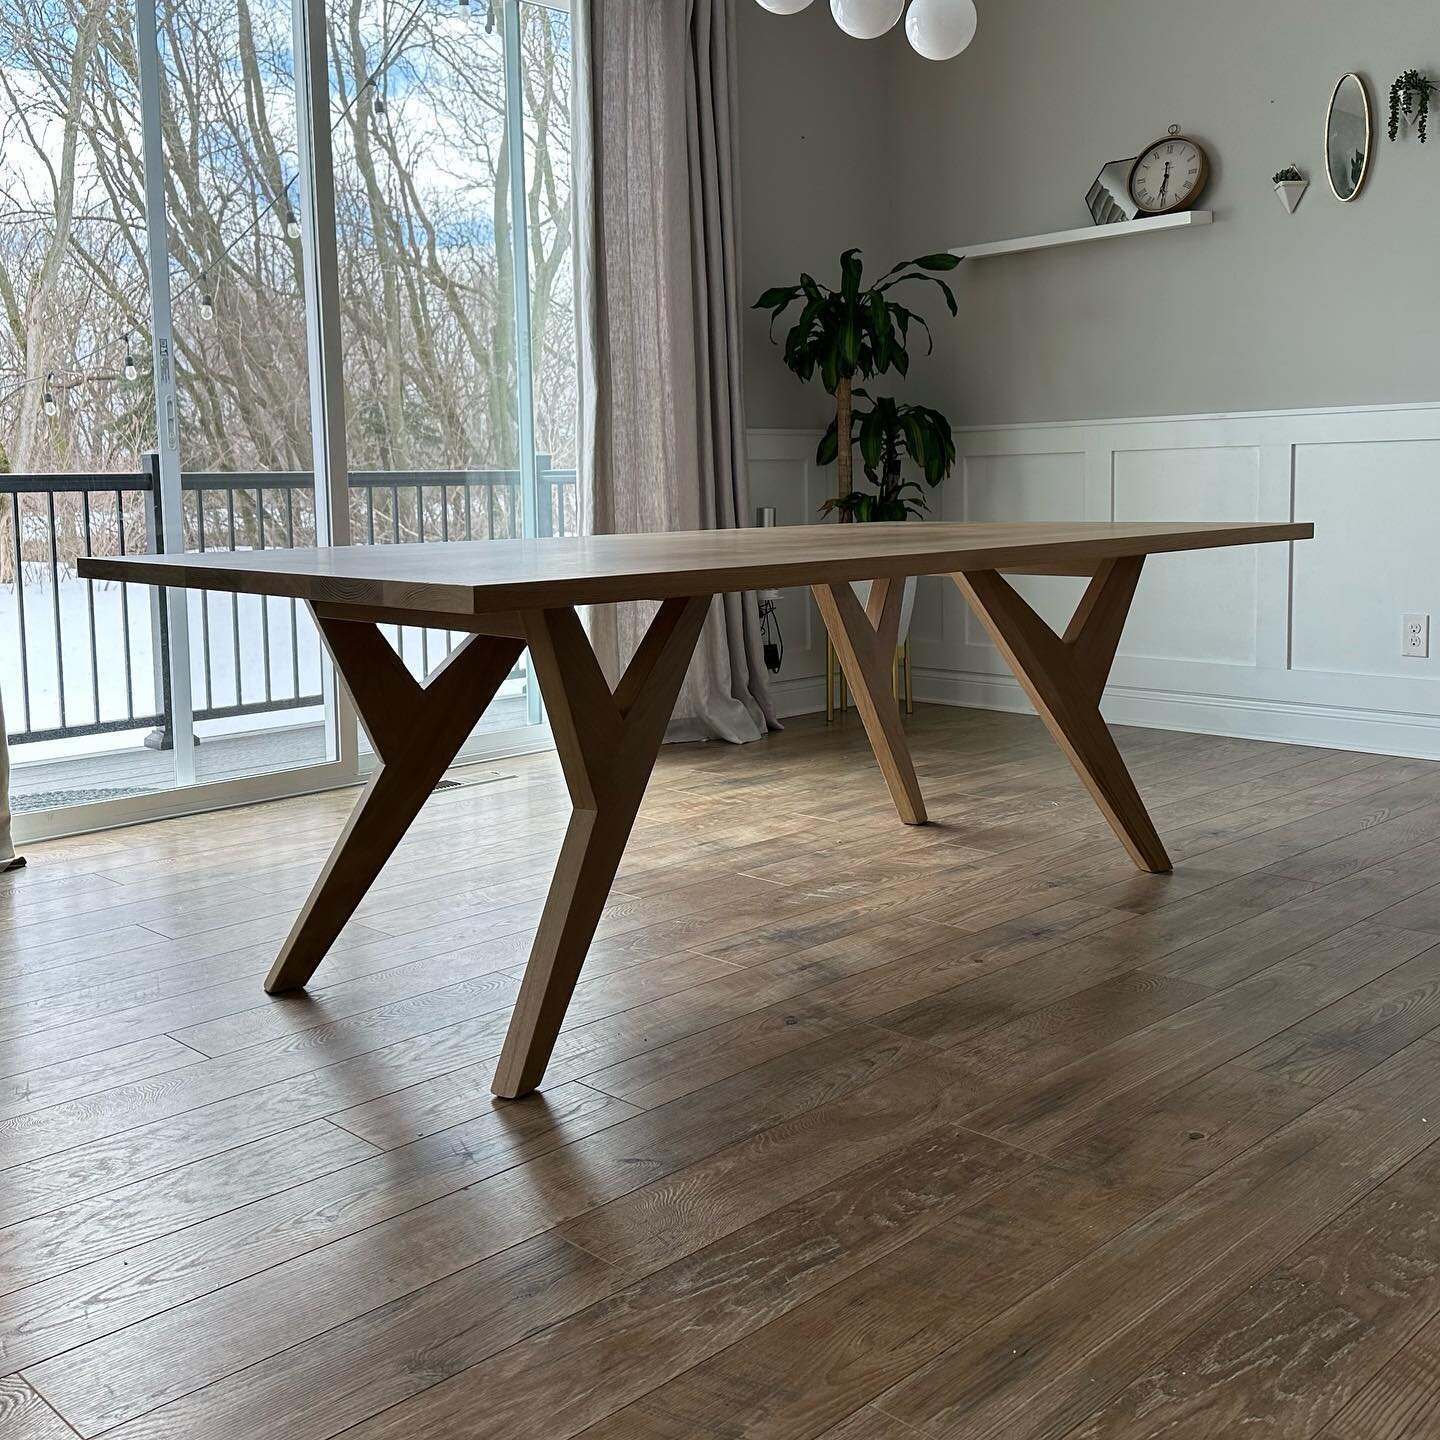 Every now and again, I get surprised by a table design, and this design did exactly that! When I initially drew out the table and legs, I wanted to ensure it was exactly what the customer wanted but also true to a style, contemporary look and feel. T